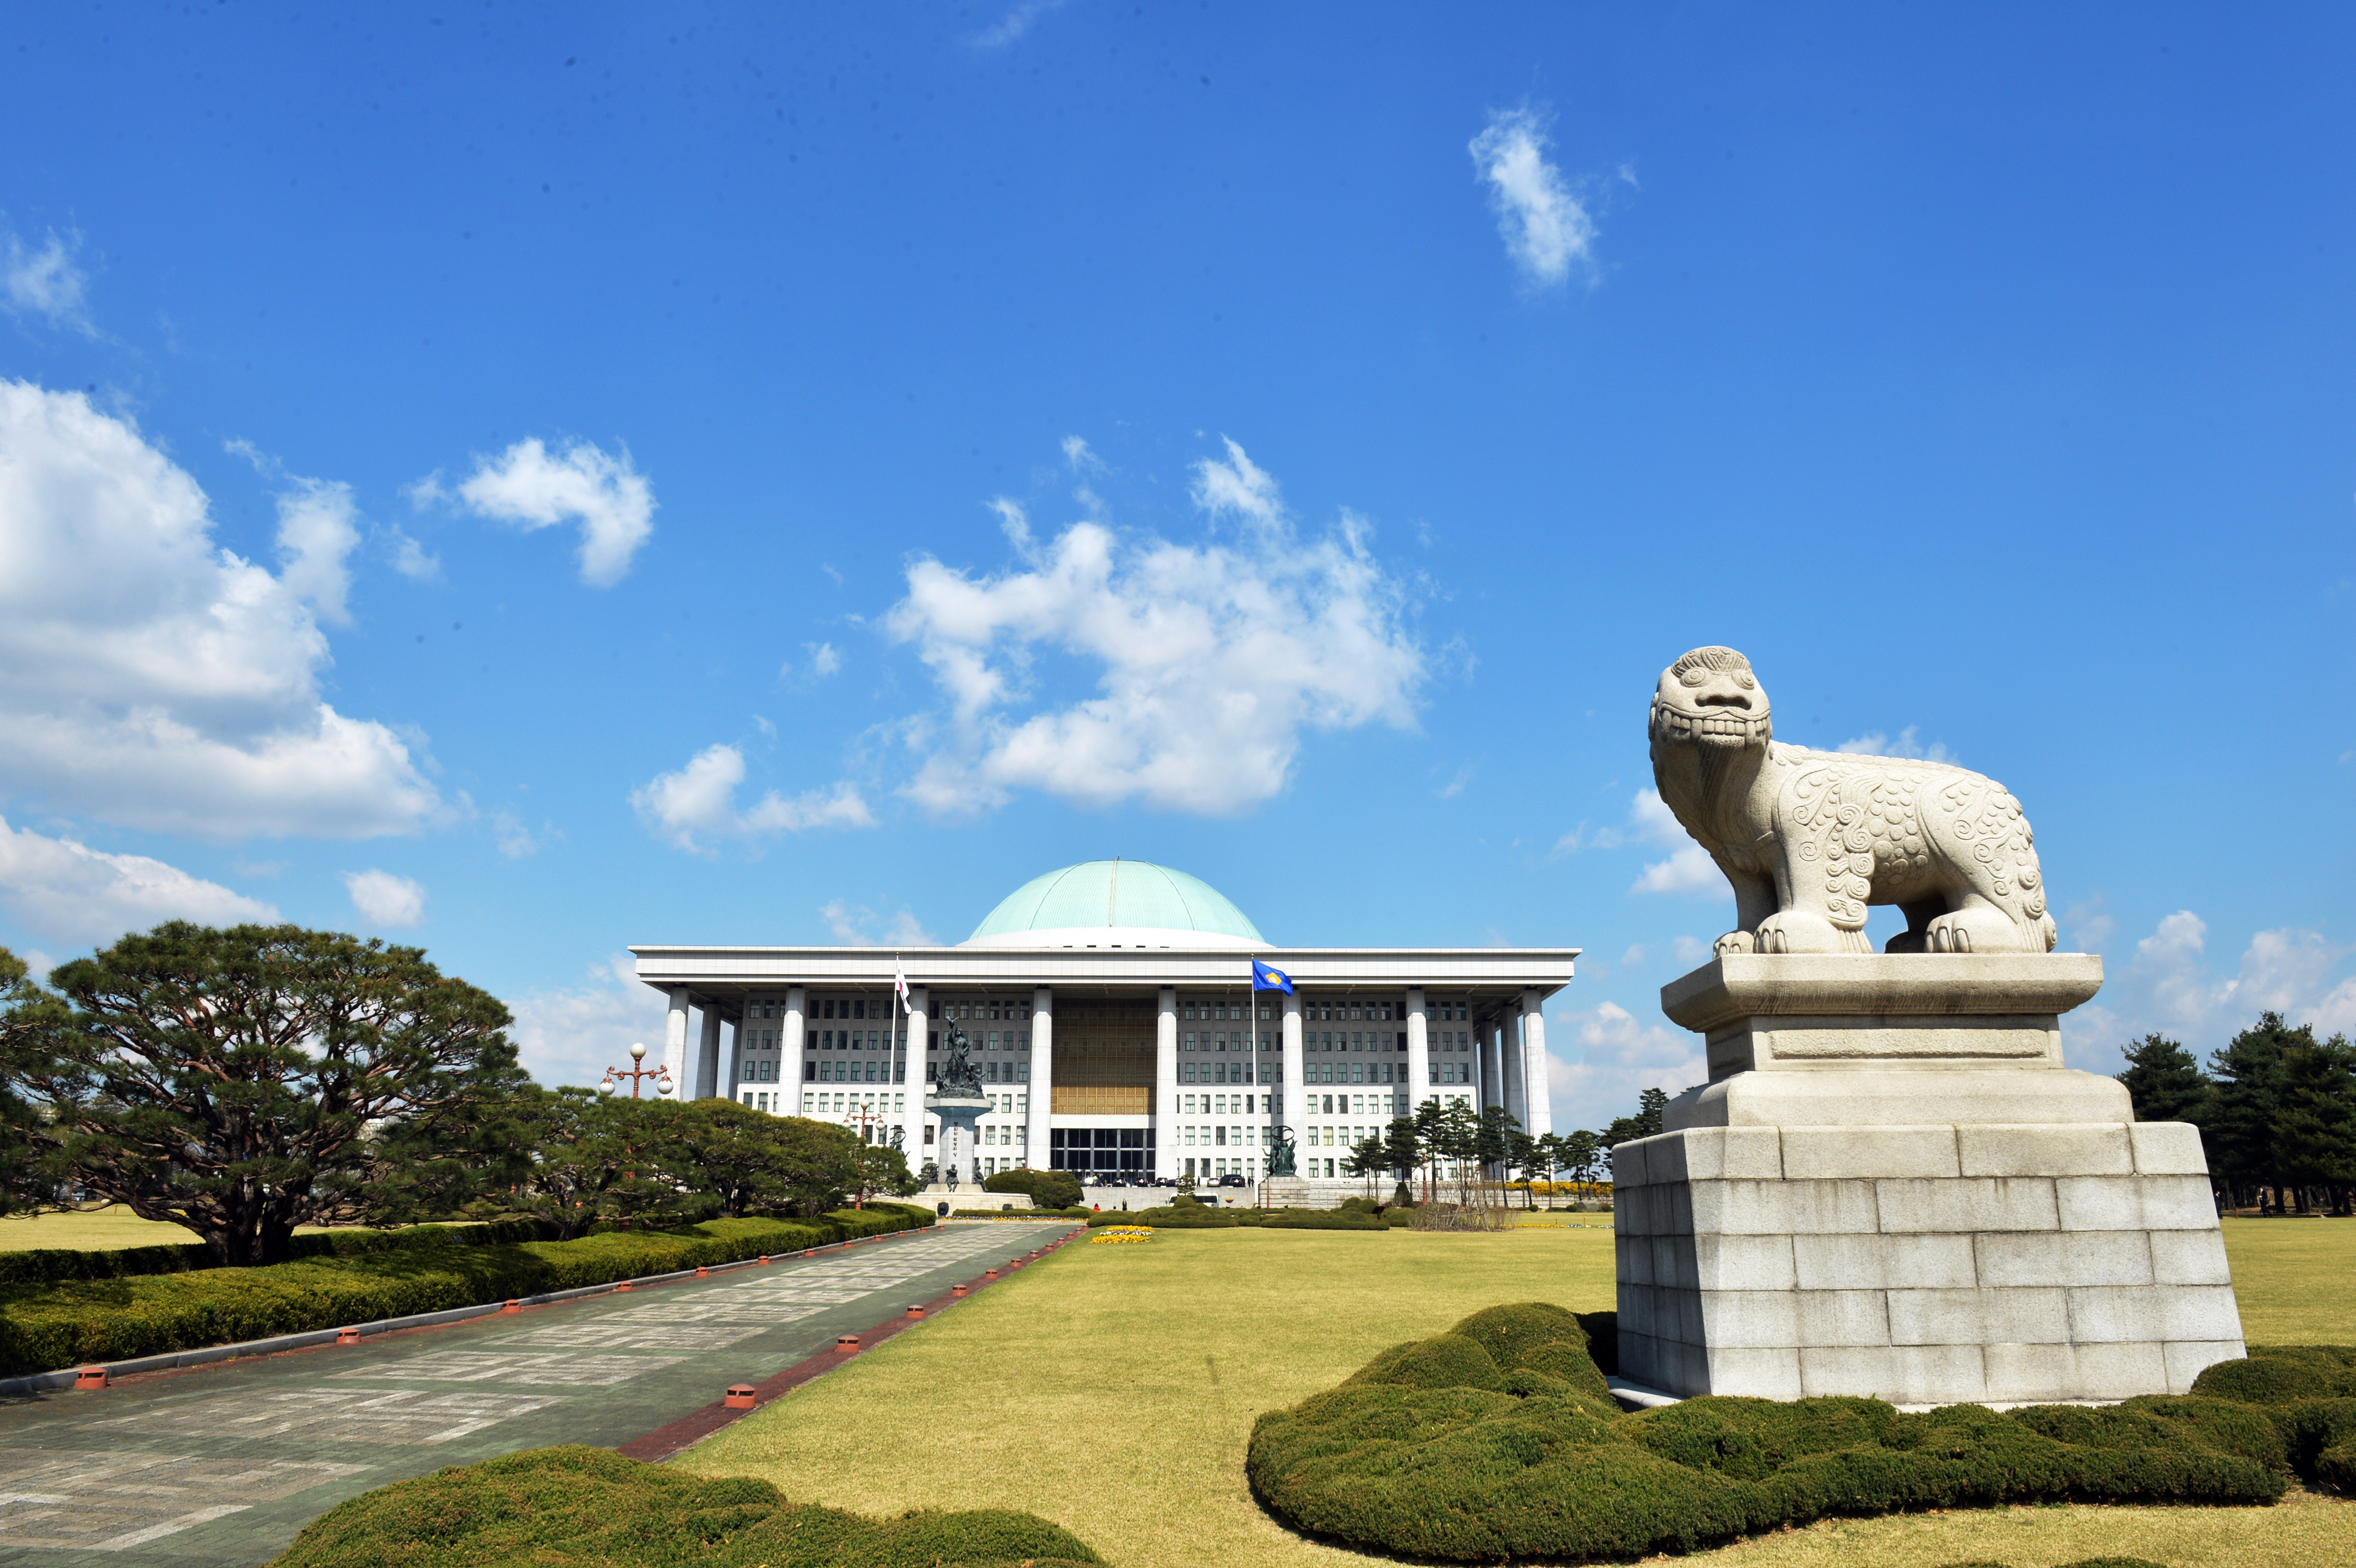 View of the National Assembly Building 관련사진 2 보기